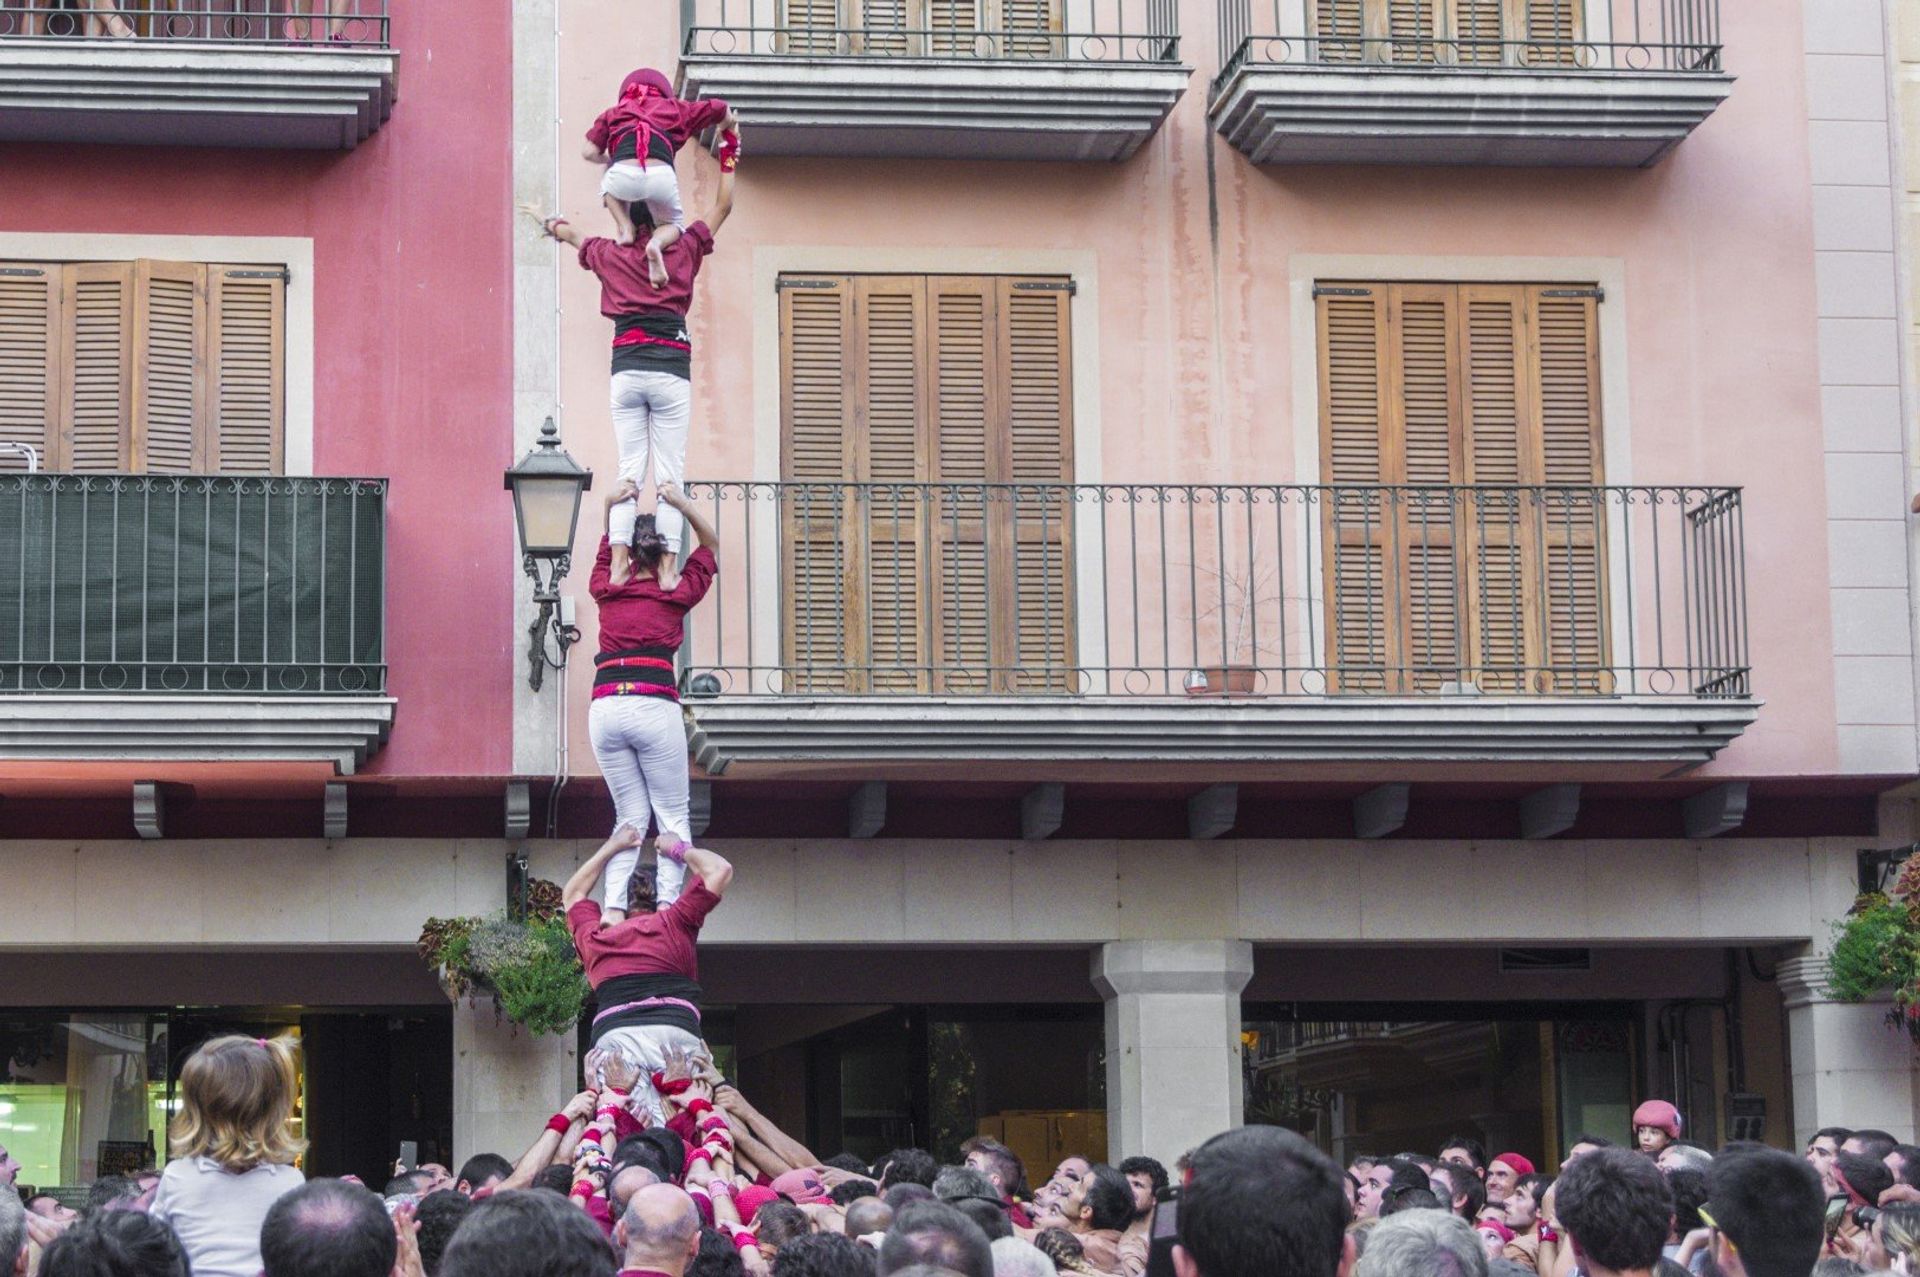 The festival of human towers or 'castellers'